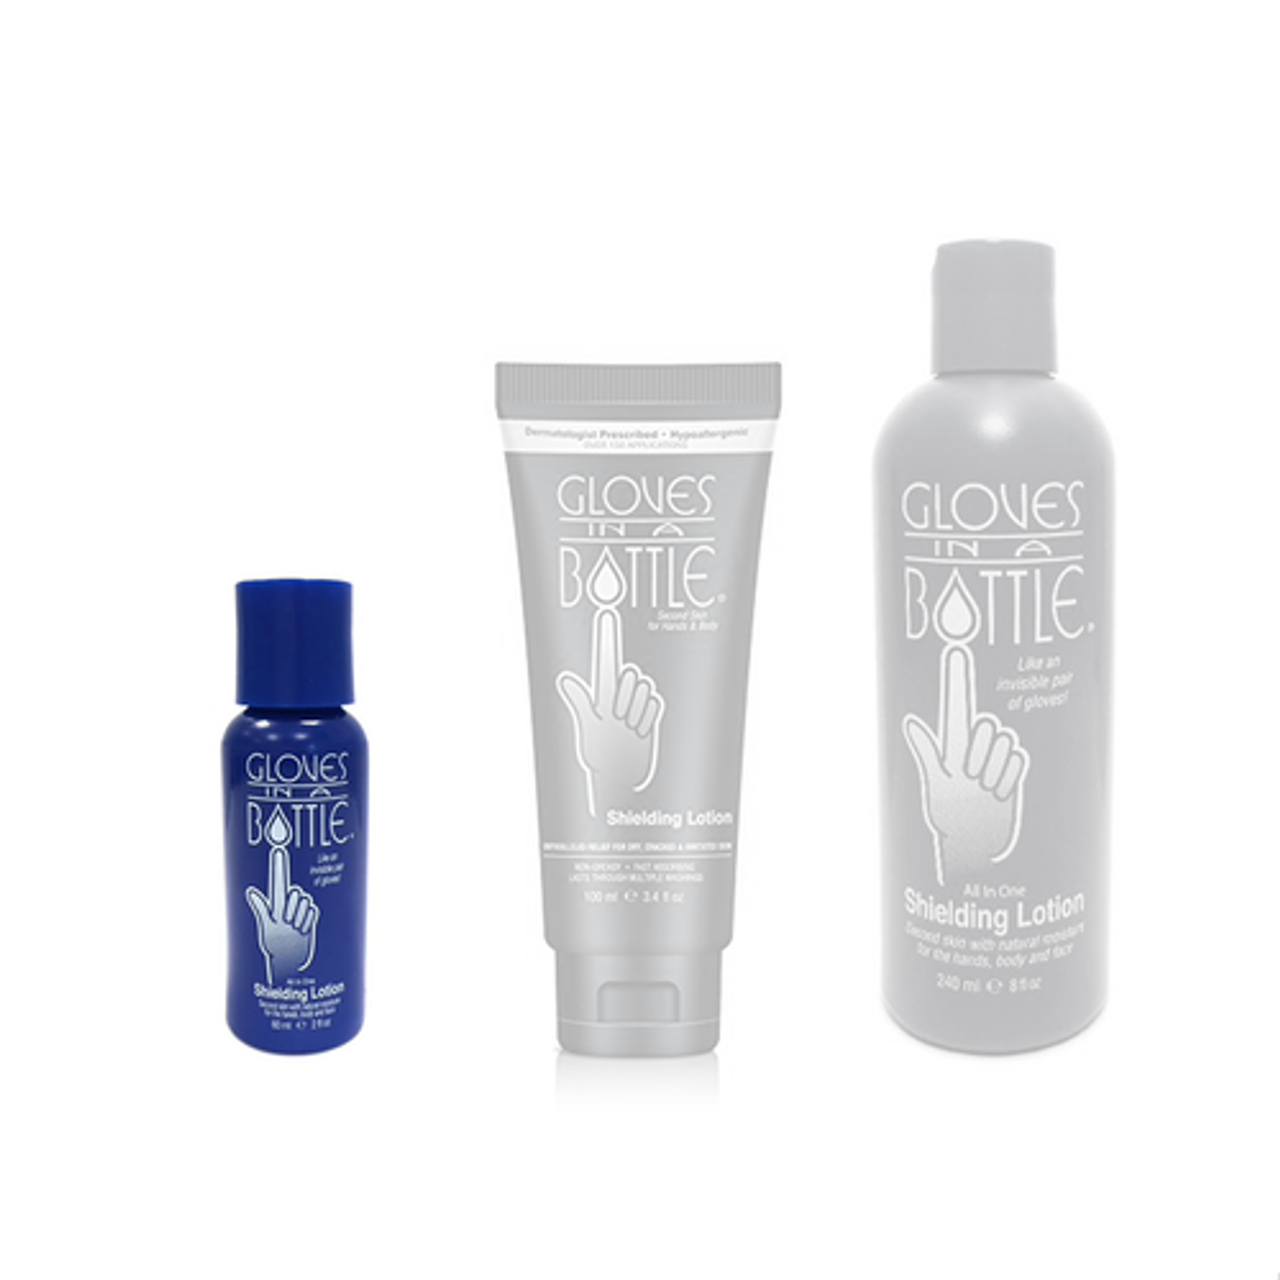 Gloves in a Bottle - Shielding and protecting lotion